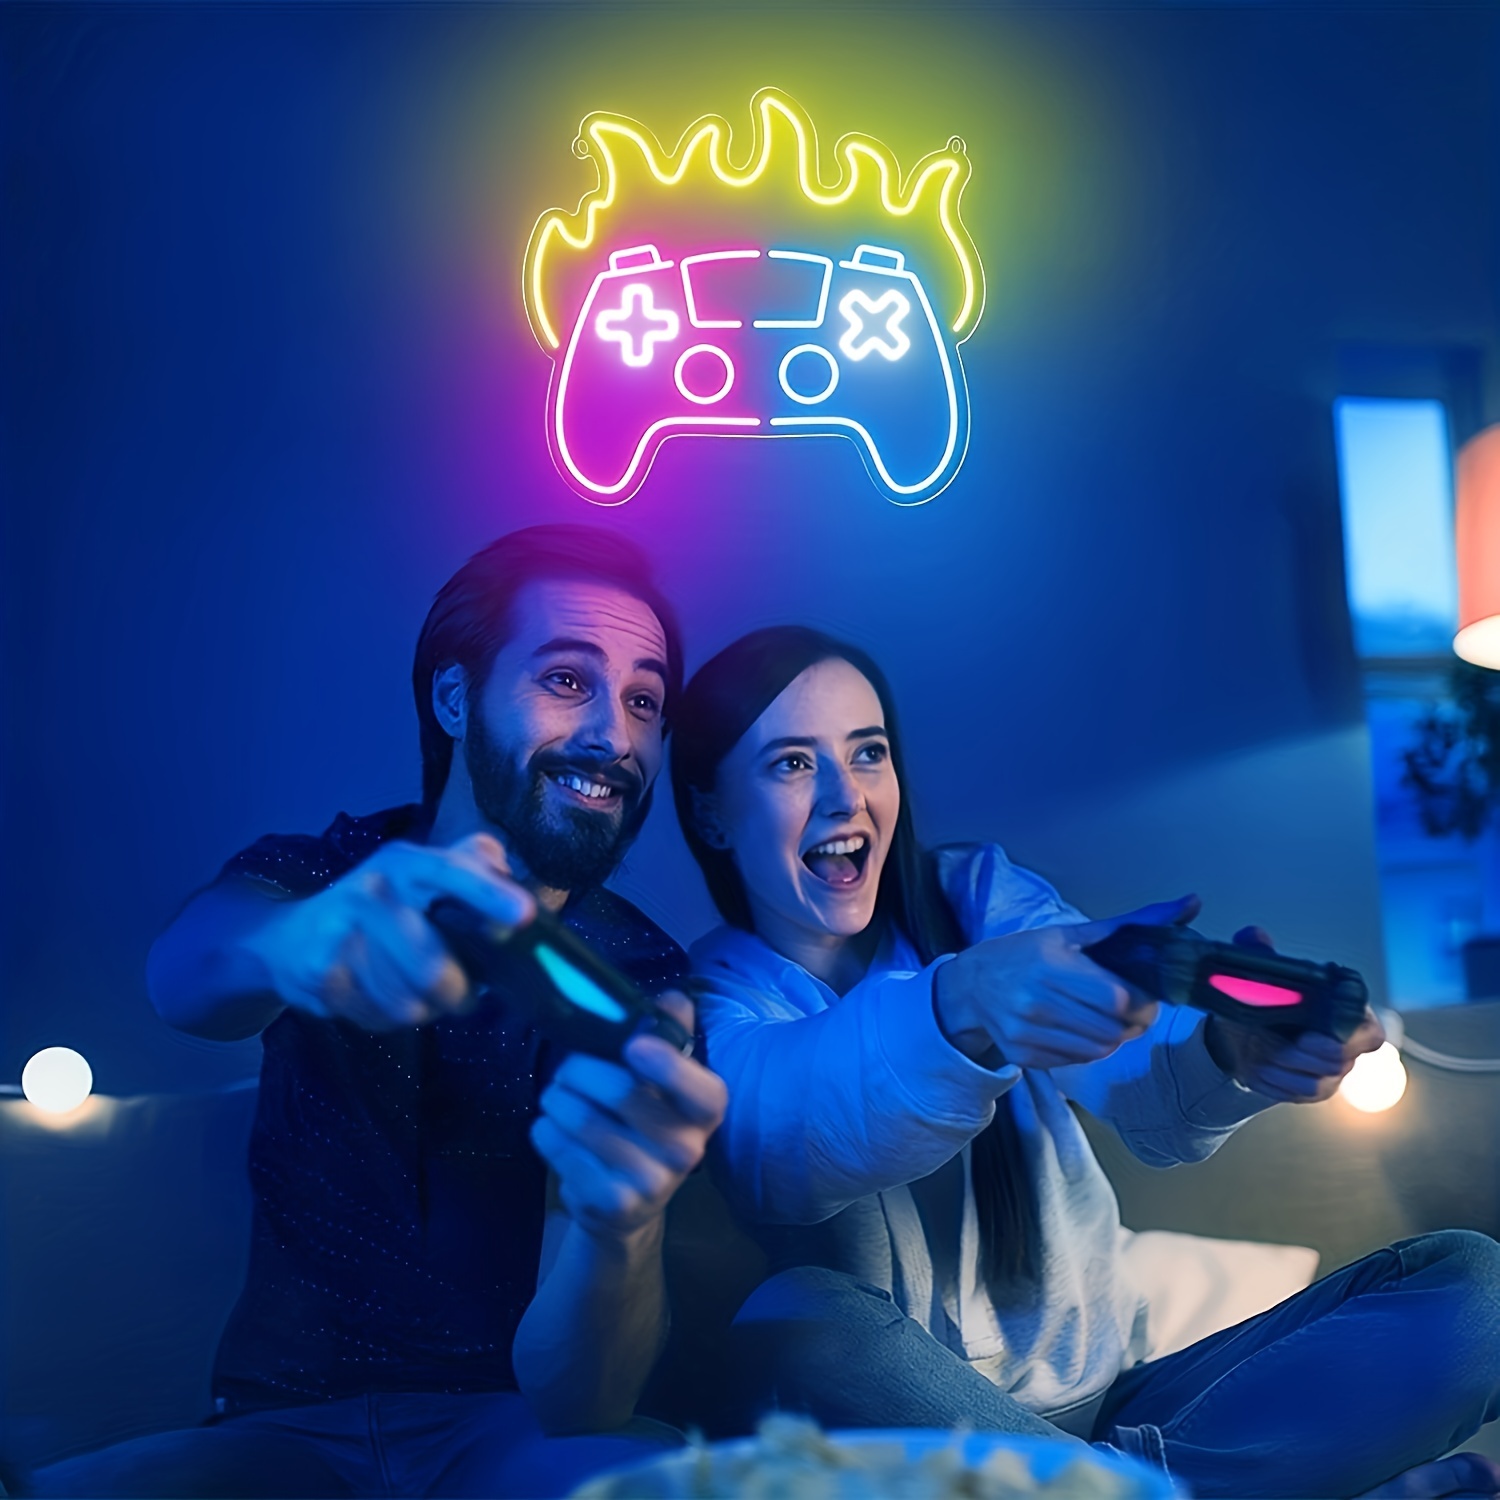 Game Neon Sign Game Room Decor Man Bedroom Wall Decoration Neon Light Signs  Gamer Gift for Teen Girls Boys Bedroom Gaming Room Decor Wall Decoration